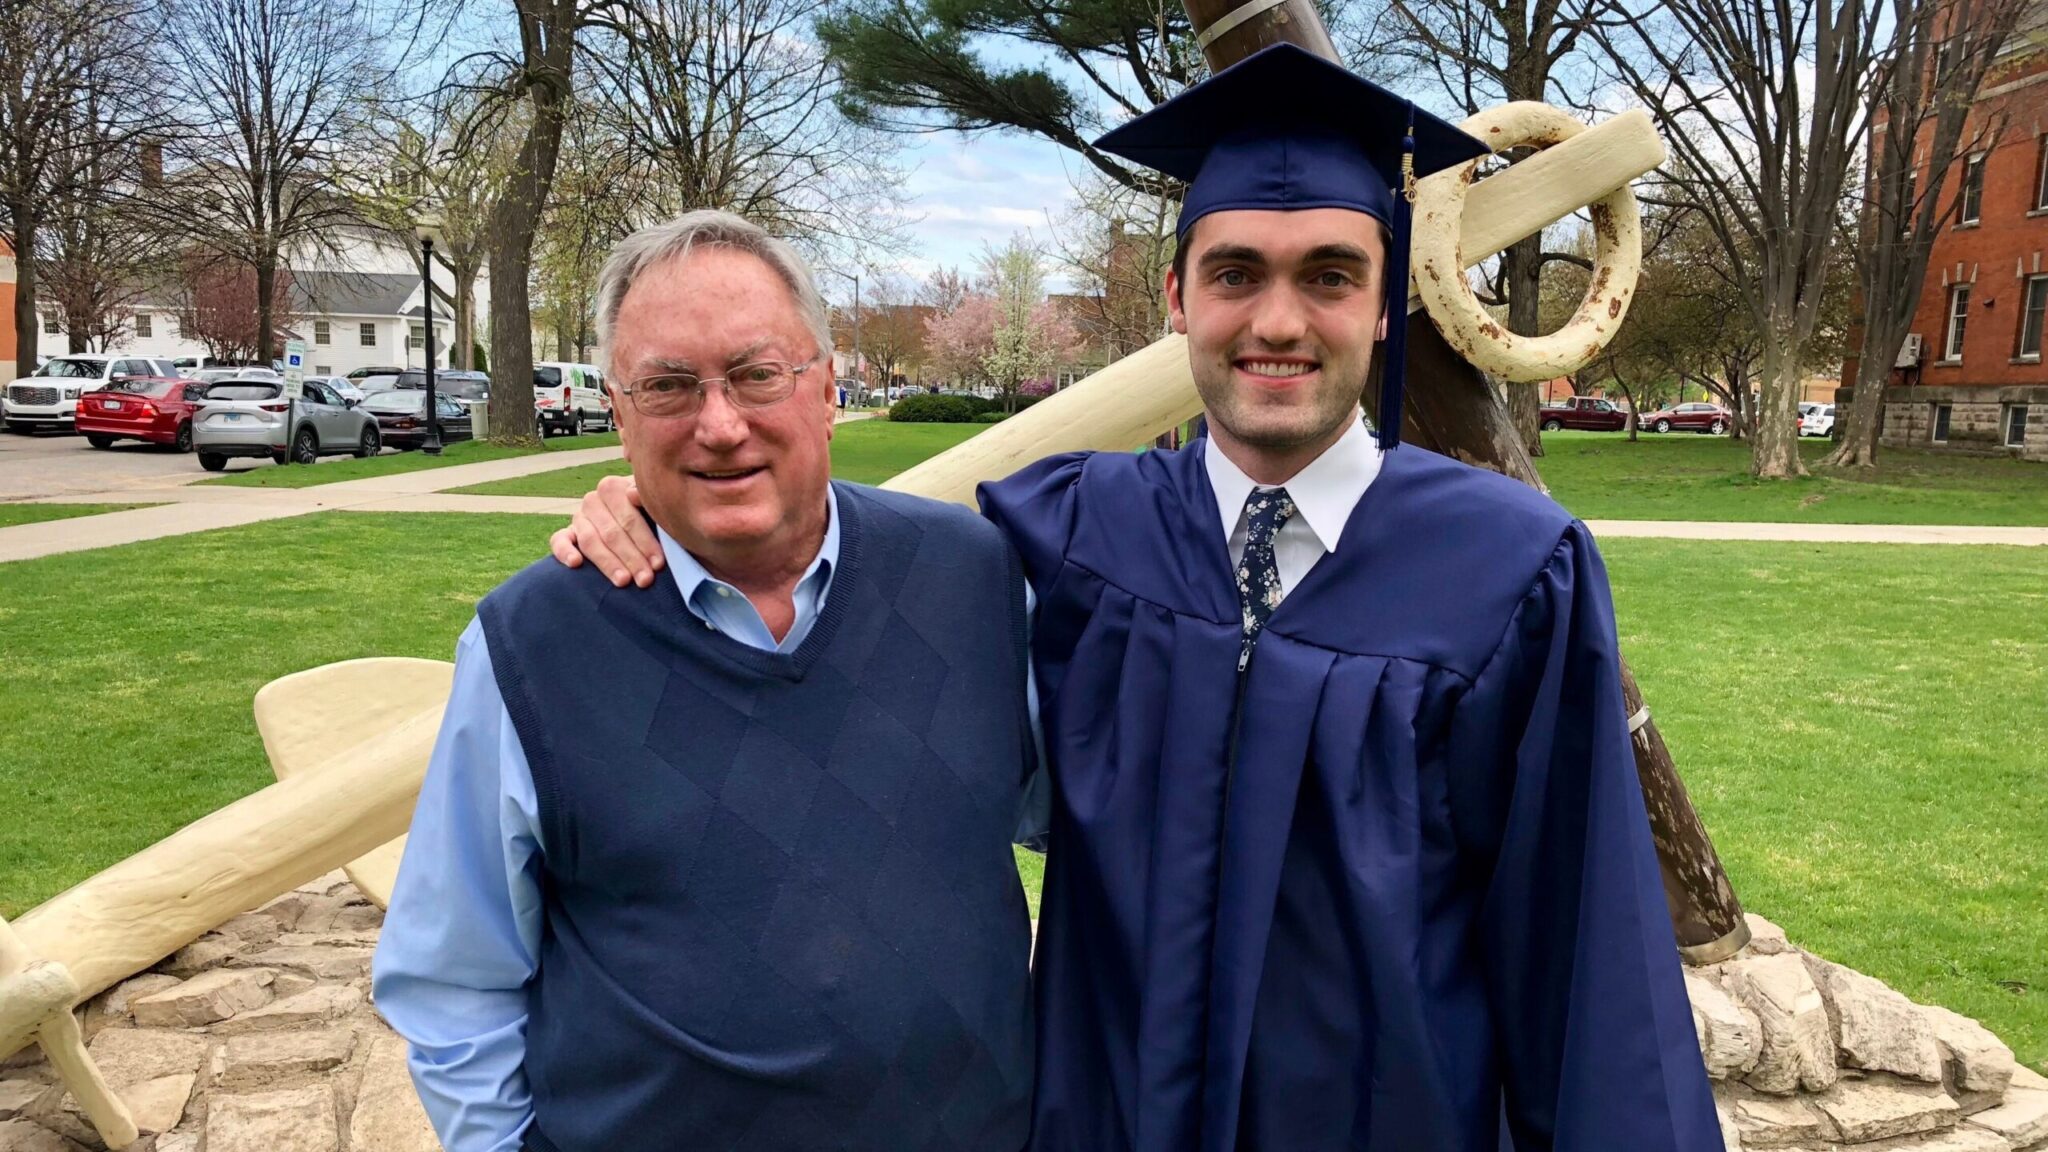 Johnny and father John Kendall pose in front of a Hope College monument at the Holland college campus following Johnny's college graduation.